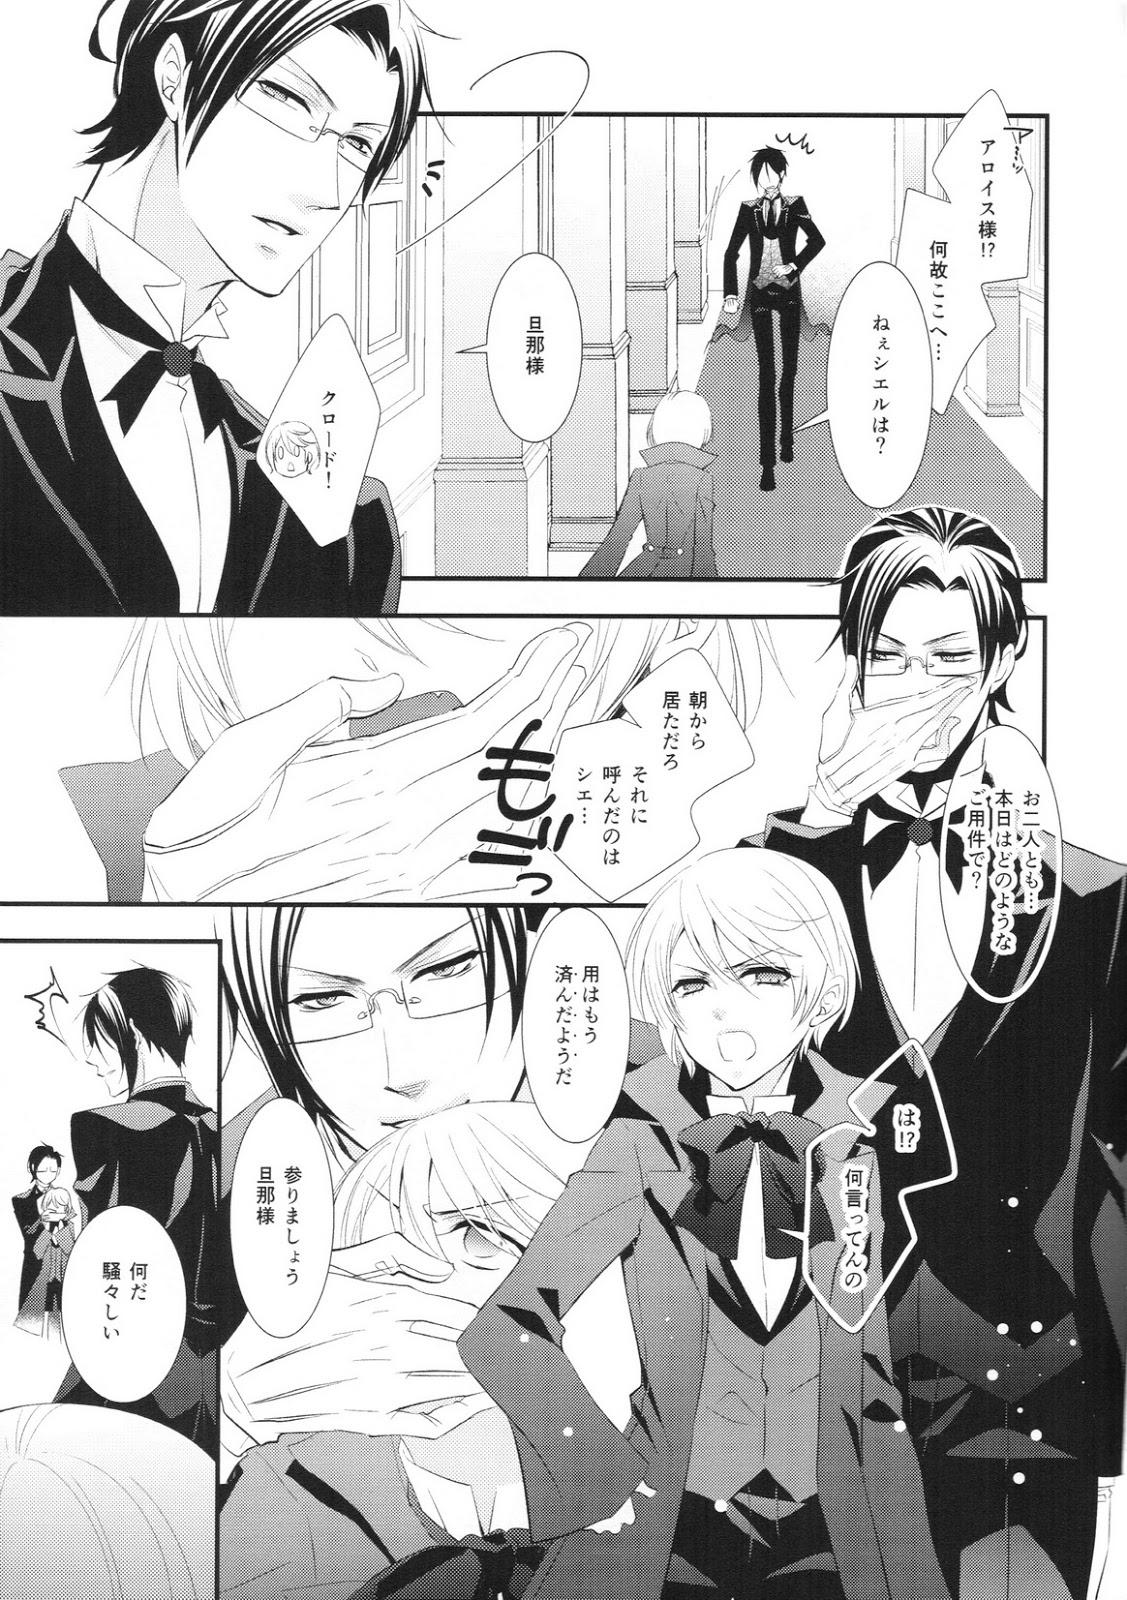 Transsexual Ripe 2 - Black butler Lesbian Porn - Page 5